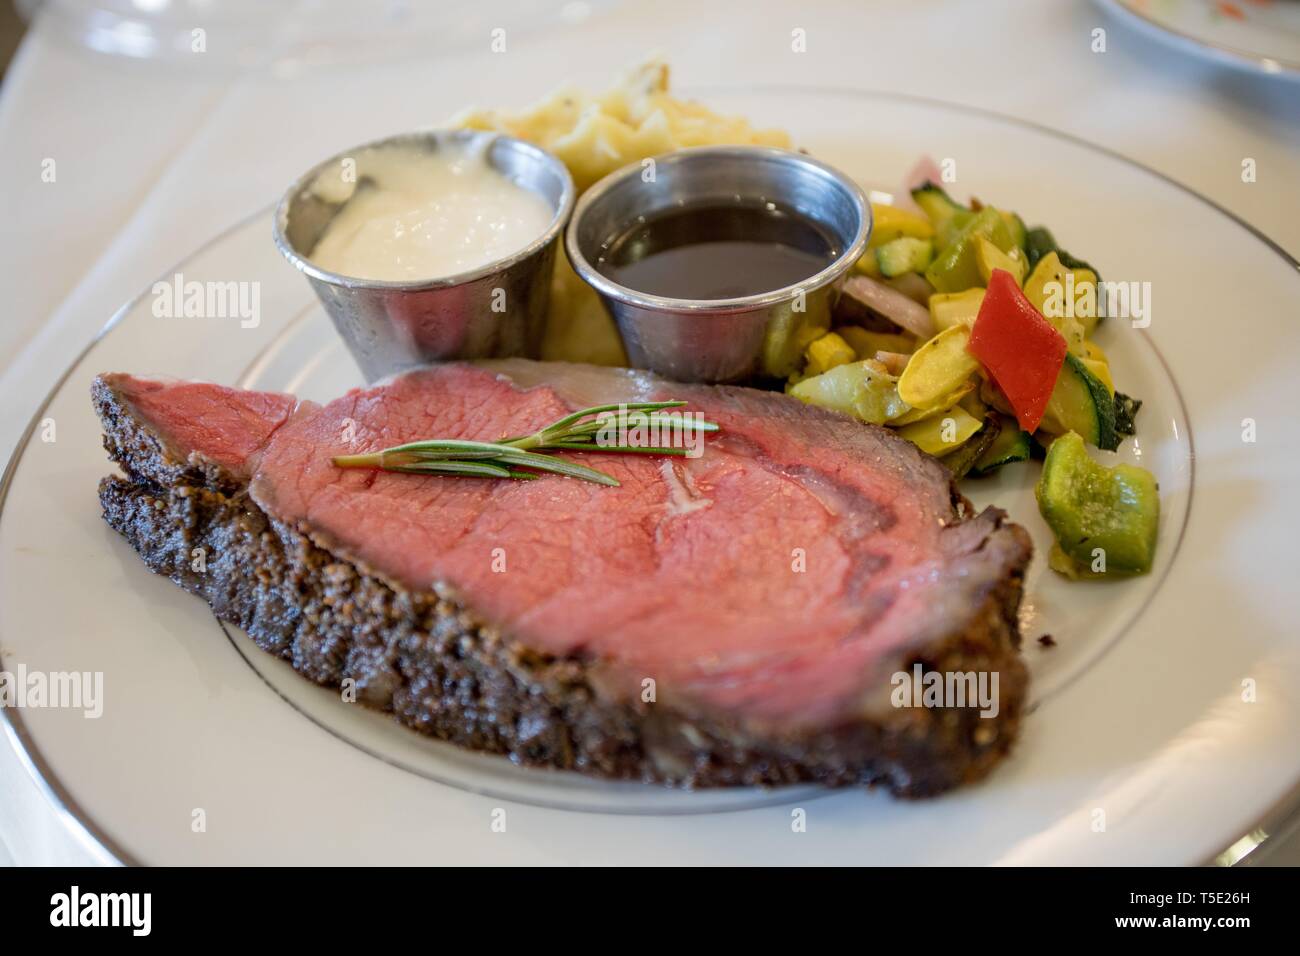 A cut of Prime Rib beef on a white plate with sides, horse radish and Au Jus shot shallow depth of field with focus on the rosemary sprig. Stock Photo